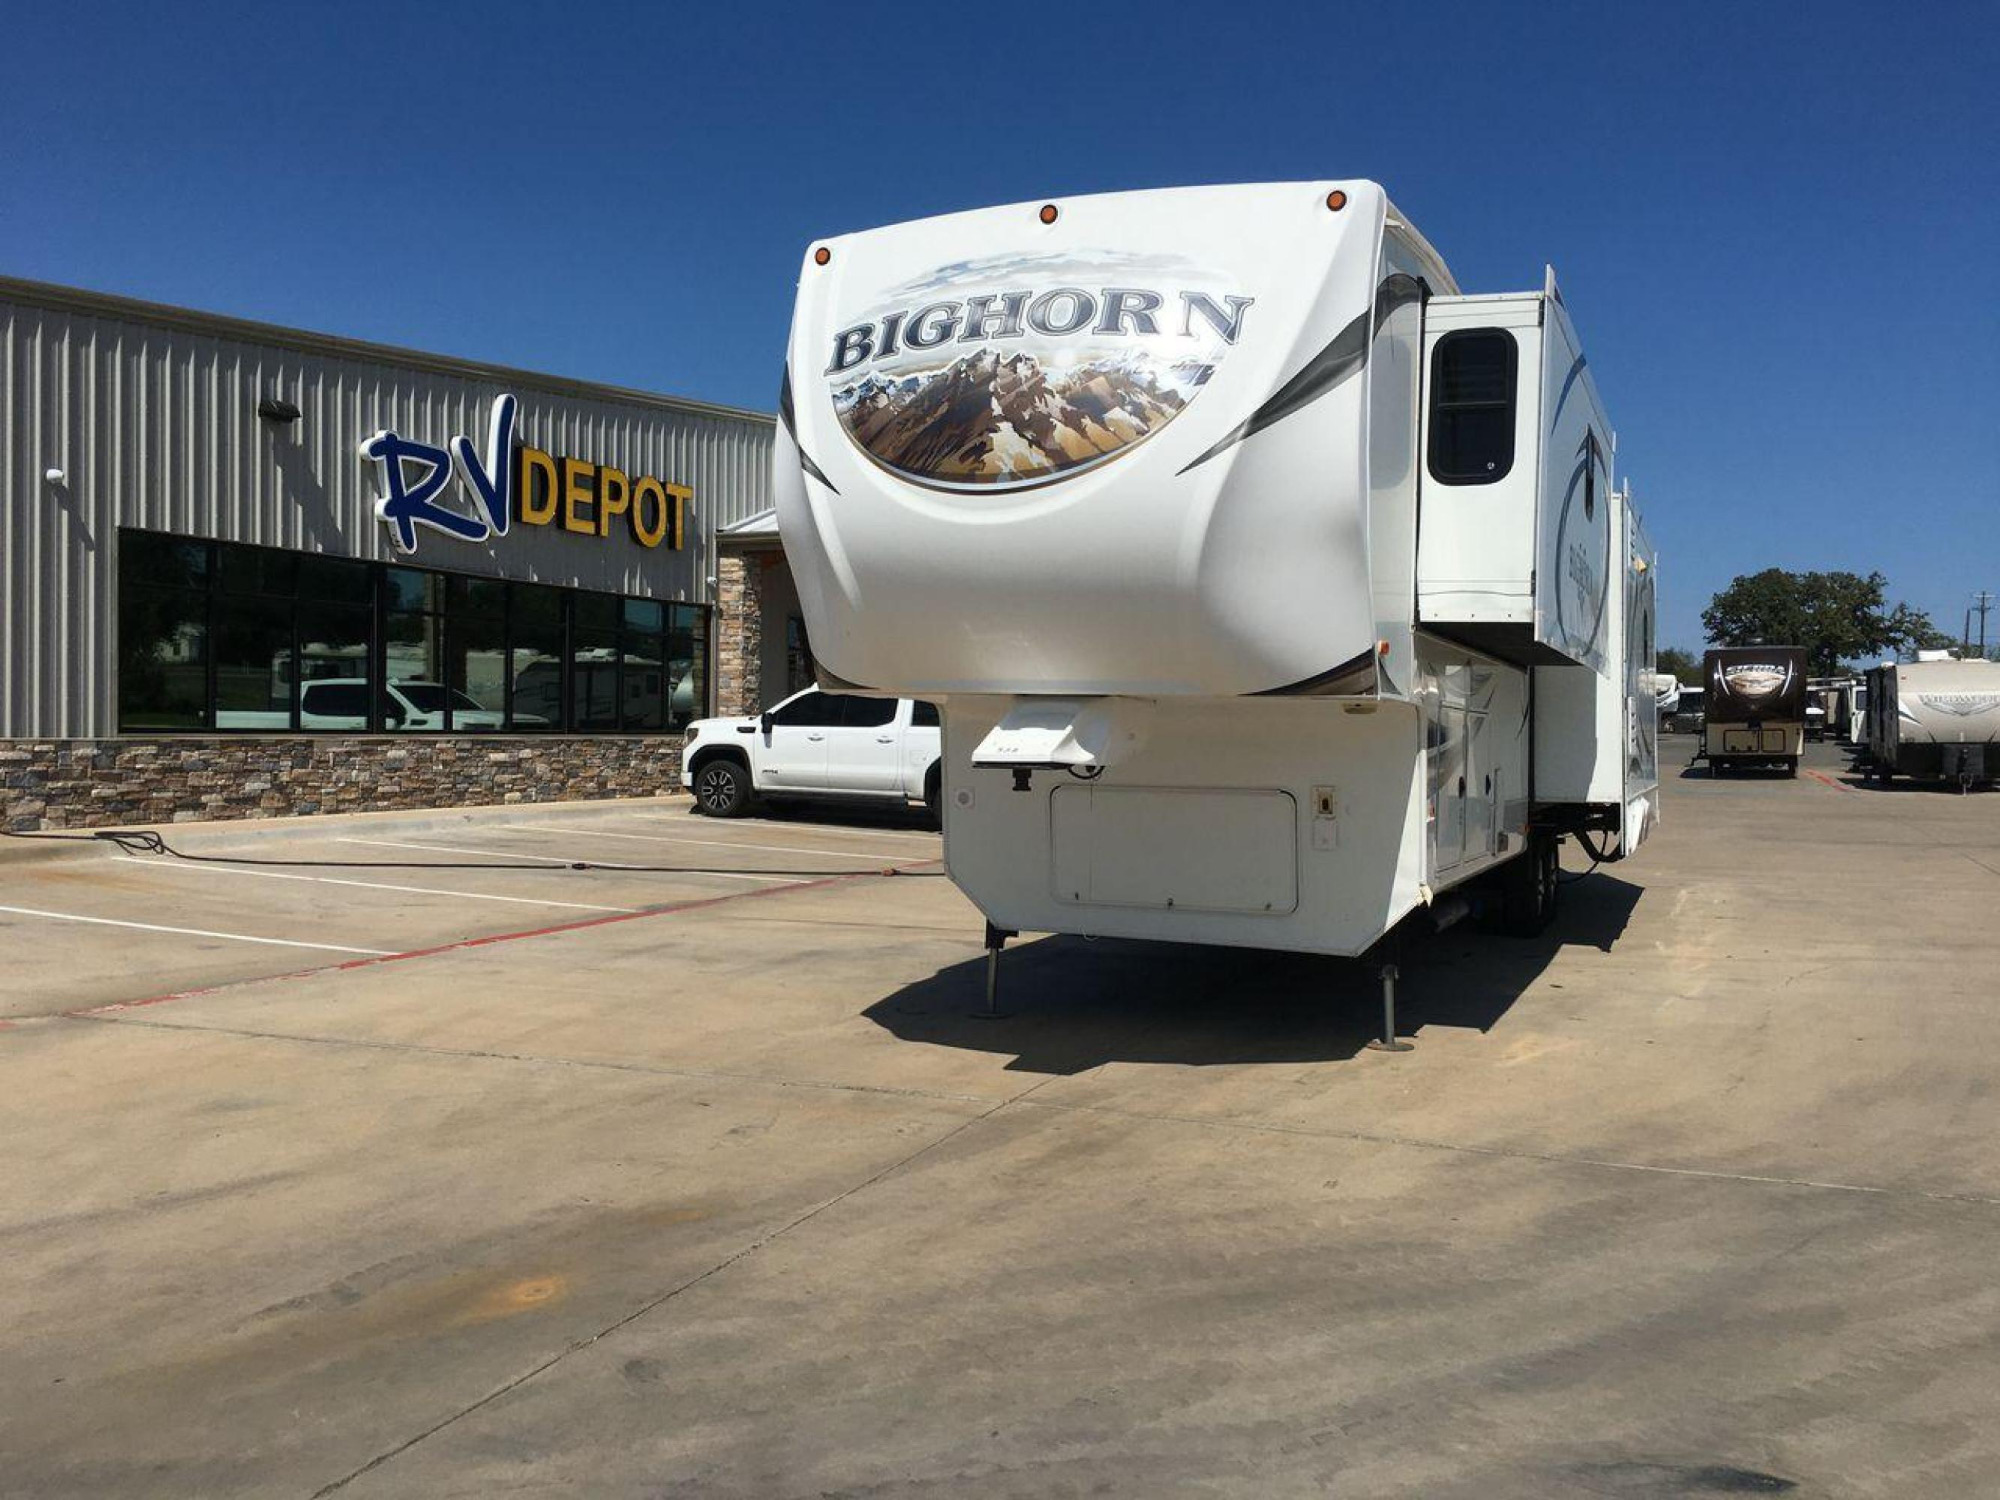 2013 WHITE HEARTLAND BIGHORN 3585RL - (5SFBG3826DE) , Length: 38.25 ft. | Dry Weight: 12,018 lbs. | Gross Weight: 15,500 lbs. | Slides: 3 transmission, located at 4319 N Main St, Cleburne, TX, 76033, (817) 678-5133, 32.385960, -97.391212 - Photo #0